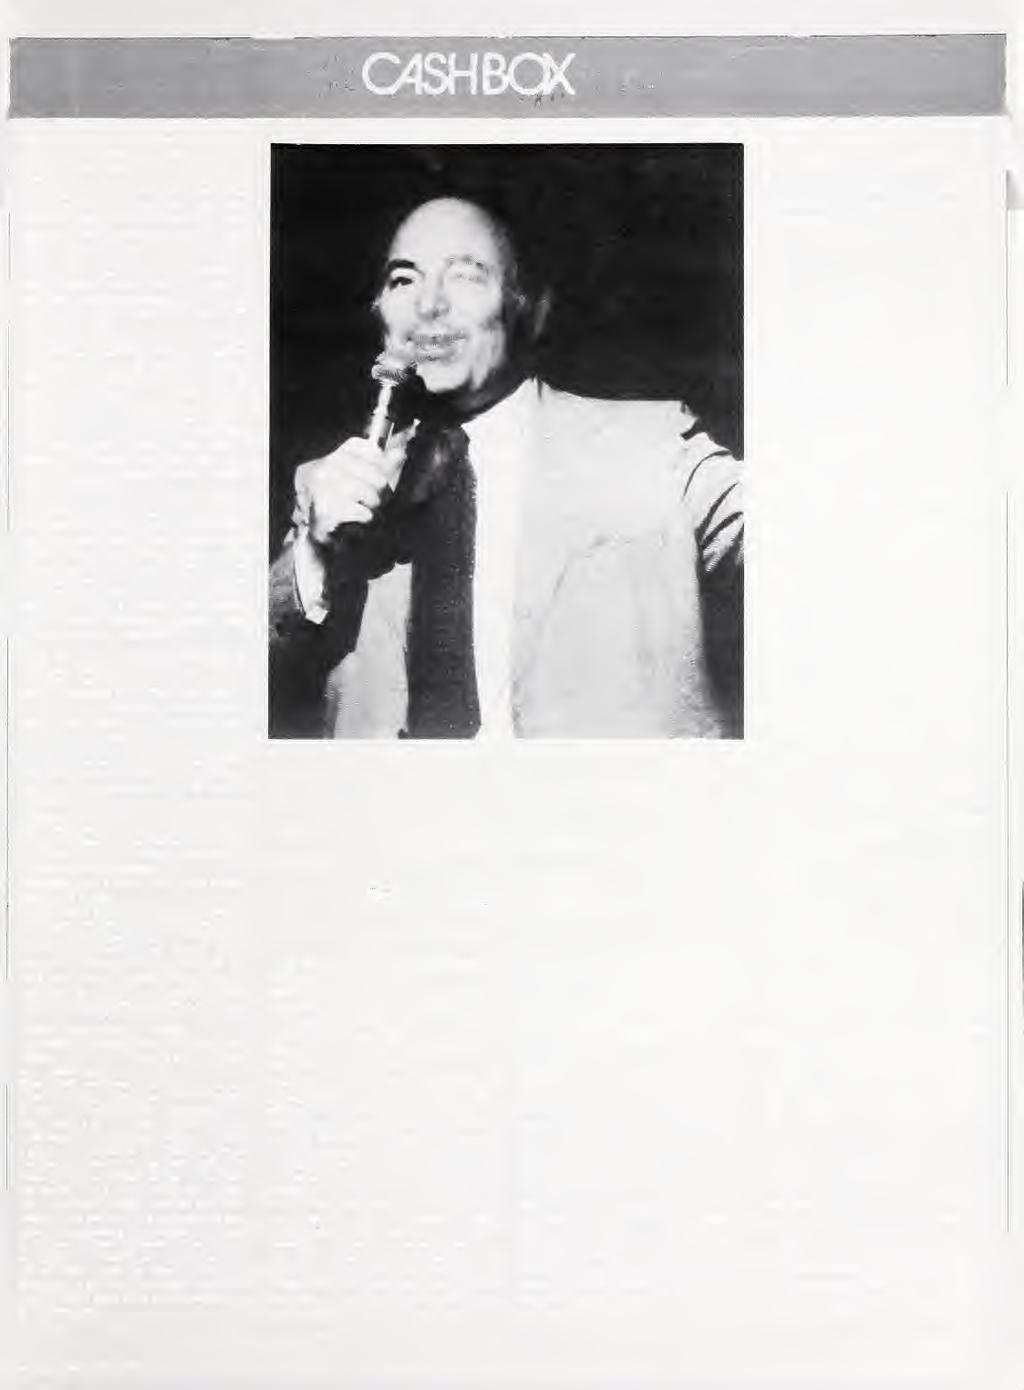 j 1 albums, ; producer, ' lished j, York i the made paid paid had don t, did see don t must have never do was 4.V-0.'y.,, George Wein is the czar of jazz festivals.